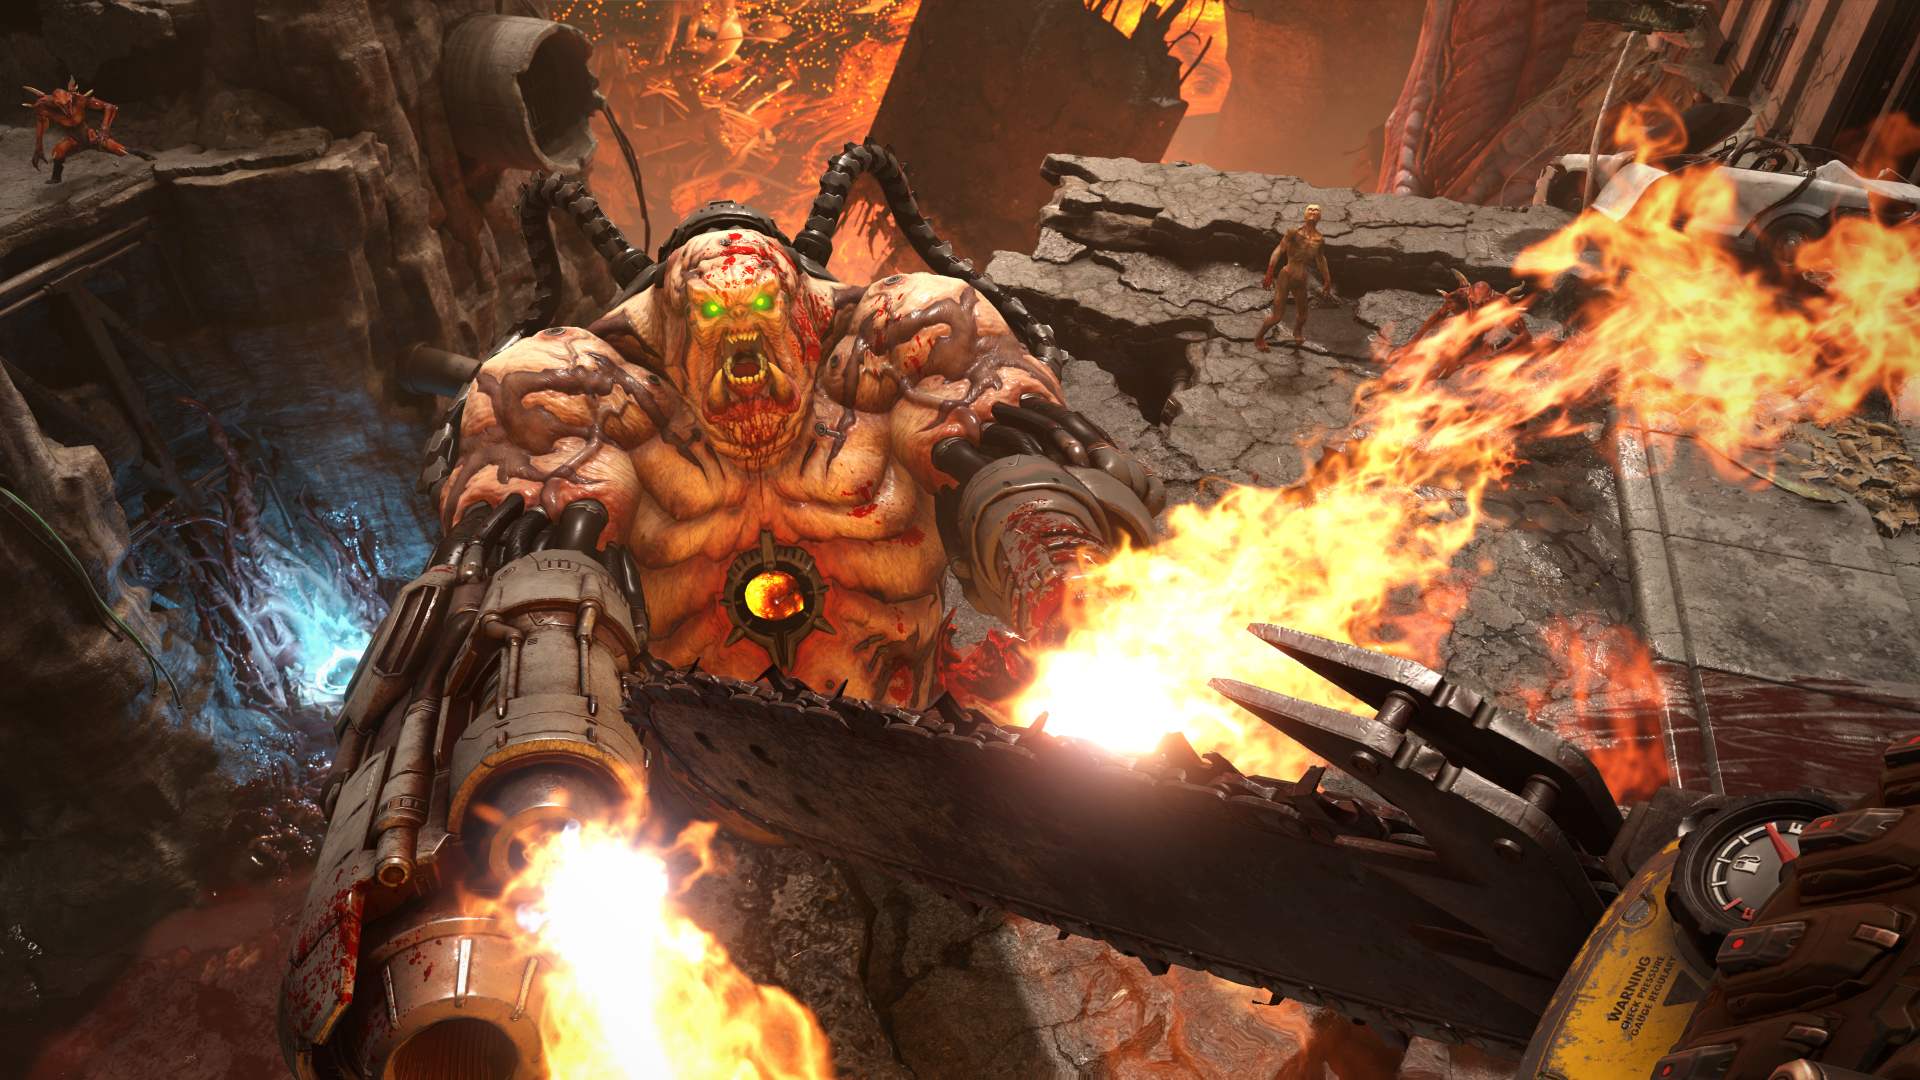 Doom Eternal now requires denuvo driver installation in order to